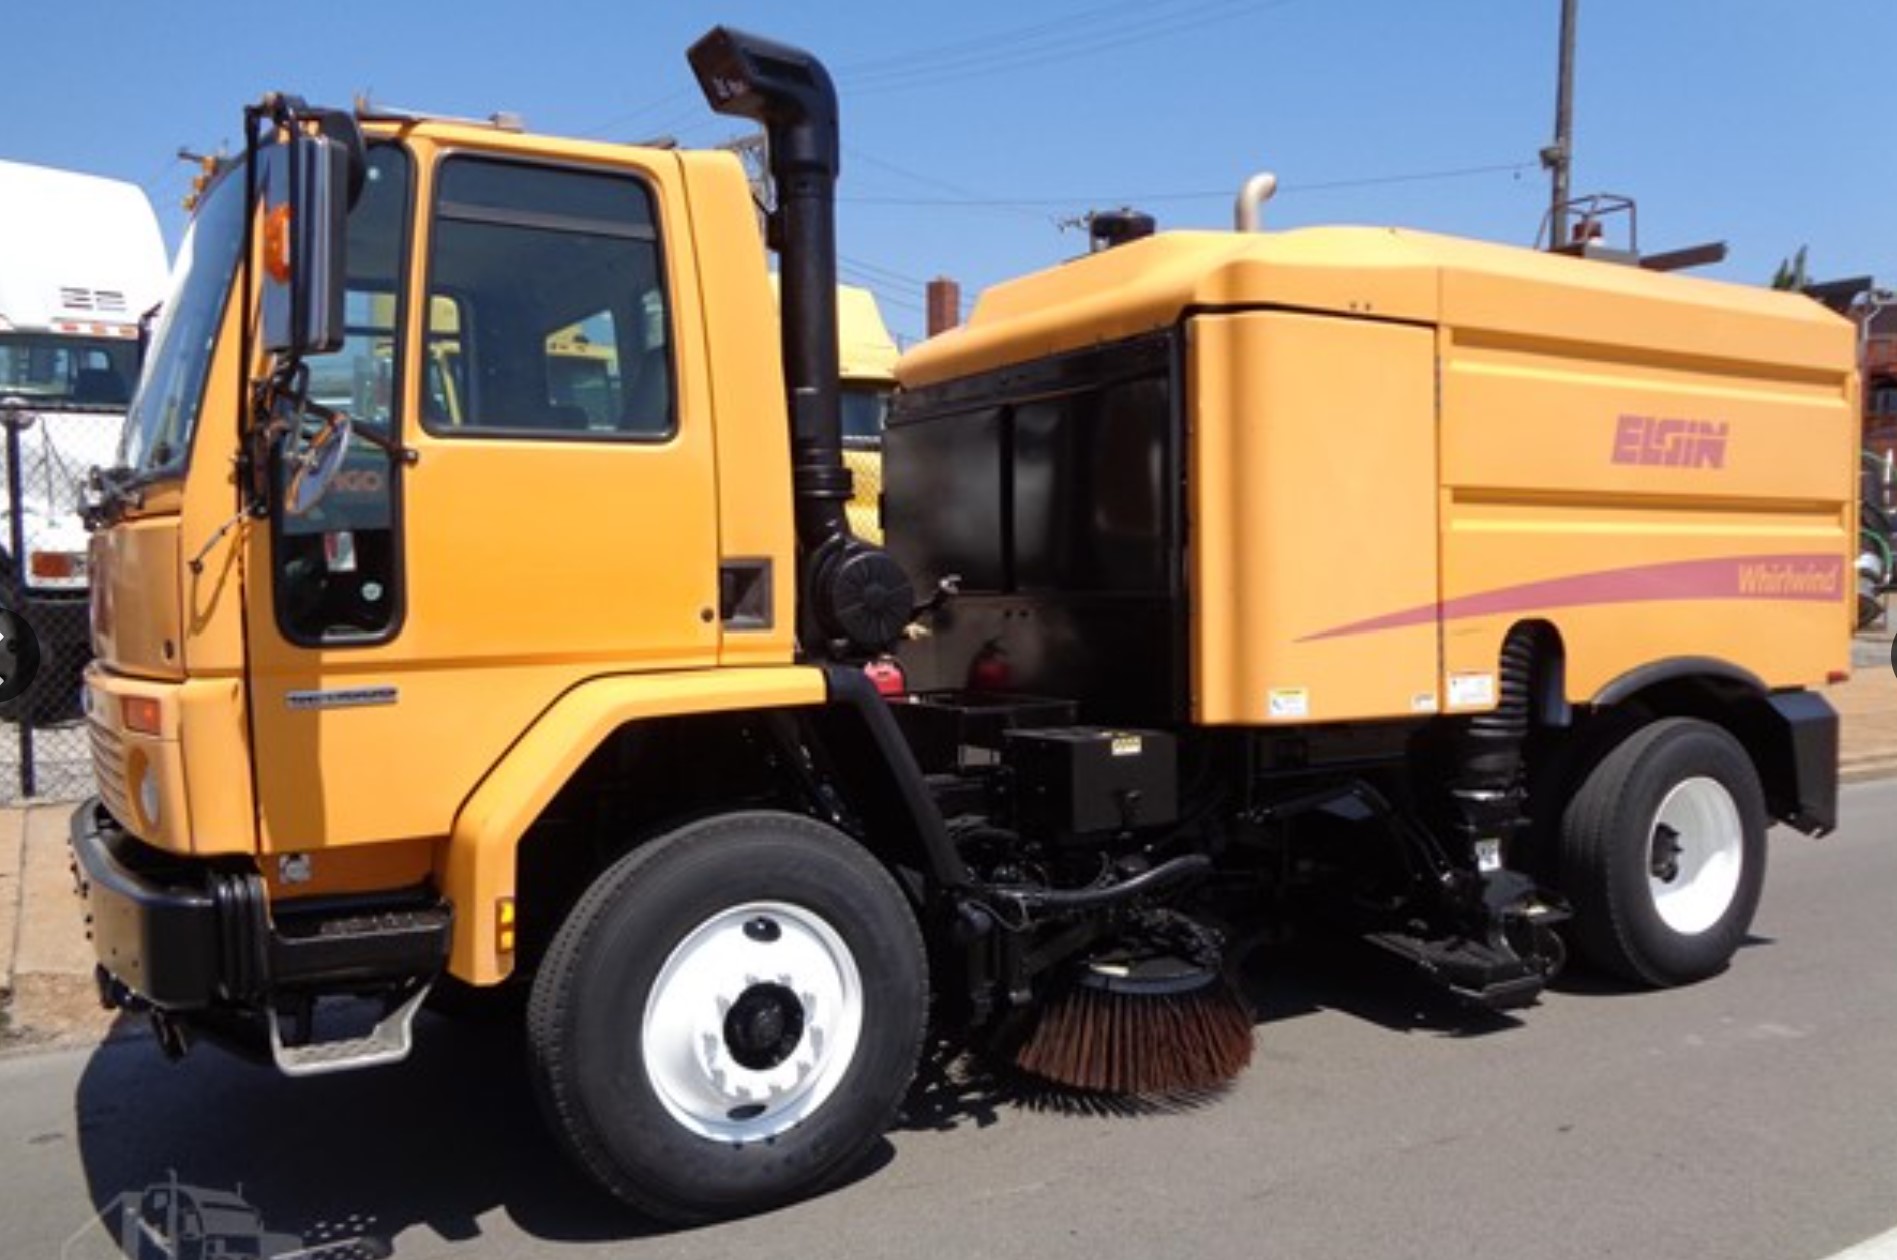  Municipal Sweeper/Vac. Truck" Pre-Emission 2007 Sterling SC-8000. Cummins ISB-200 H.P. (40,199 Miles05569 Hour's) Allison 2500RDS Automatic Transmission, P.S. A/C, Cruise, AM/FM/CD Aux.Input Radio, Pro Vision Back Up Camera, Dual Steer Drive, Rear Axle Traction Control, (2) Air Ride Driver Seat's, Elgin Whirlwind MV Series Sweeper/Vacum (Serial #MV1311D-Mfg. 5-4-2007) Rear Warning Lights/Direction Display, 4 Cylinder John Deere Pony Motor (3591 Hour's) Hydraulic Dumping Hopper, Rear Hopper Door, Center Broom, Driver/Passenger Gutter Brooms, Water Tank System. "Recently Released From Active Municipal Service" Unique Opportunity to Purchase a True One Owner Sweeper/Vac. Truck! Specifications General Quantity1 Stock Number15134 Year2007 ManufacturerSTERLING ModelSC8000 ConditionUsed Mileage40,199 mi VIN49HAADBV87DX61653 Engine Horsepower200 HP Engine ManufacturerCummins Engine ModelISB Fuel TypeDiesel Powertrain TransmissionAutomatic Chassis SuspensionSpring Number of Rear AxlesSingle Tires22.5 WheelsAll Steel Gross Vehicle Weight33,000 lb Front Axle Weight12,000 lb Rear Axle Weight21,000 lb Interior